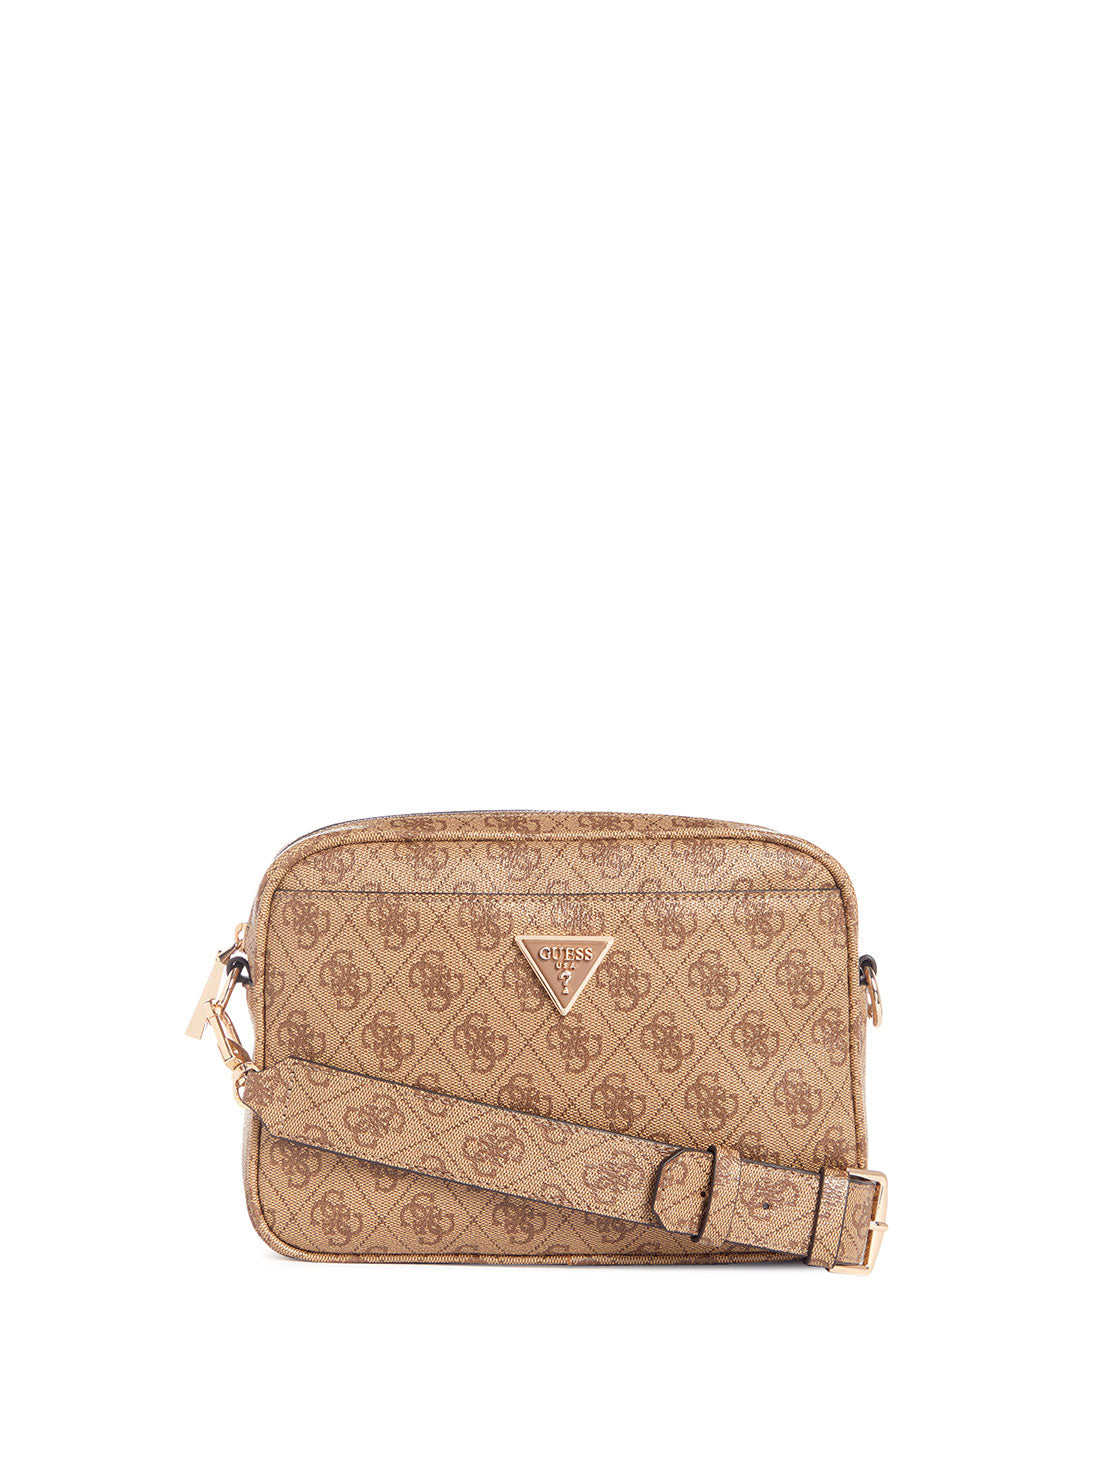 GUESS Beige Logo Meridian Camera Bag front view